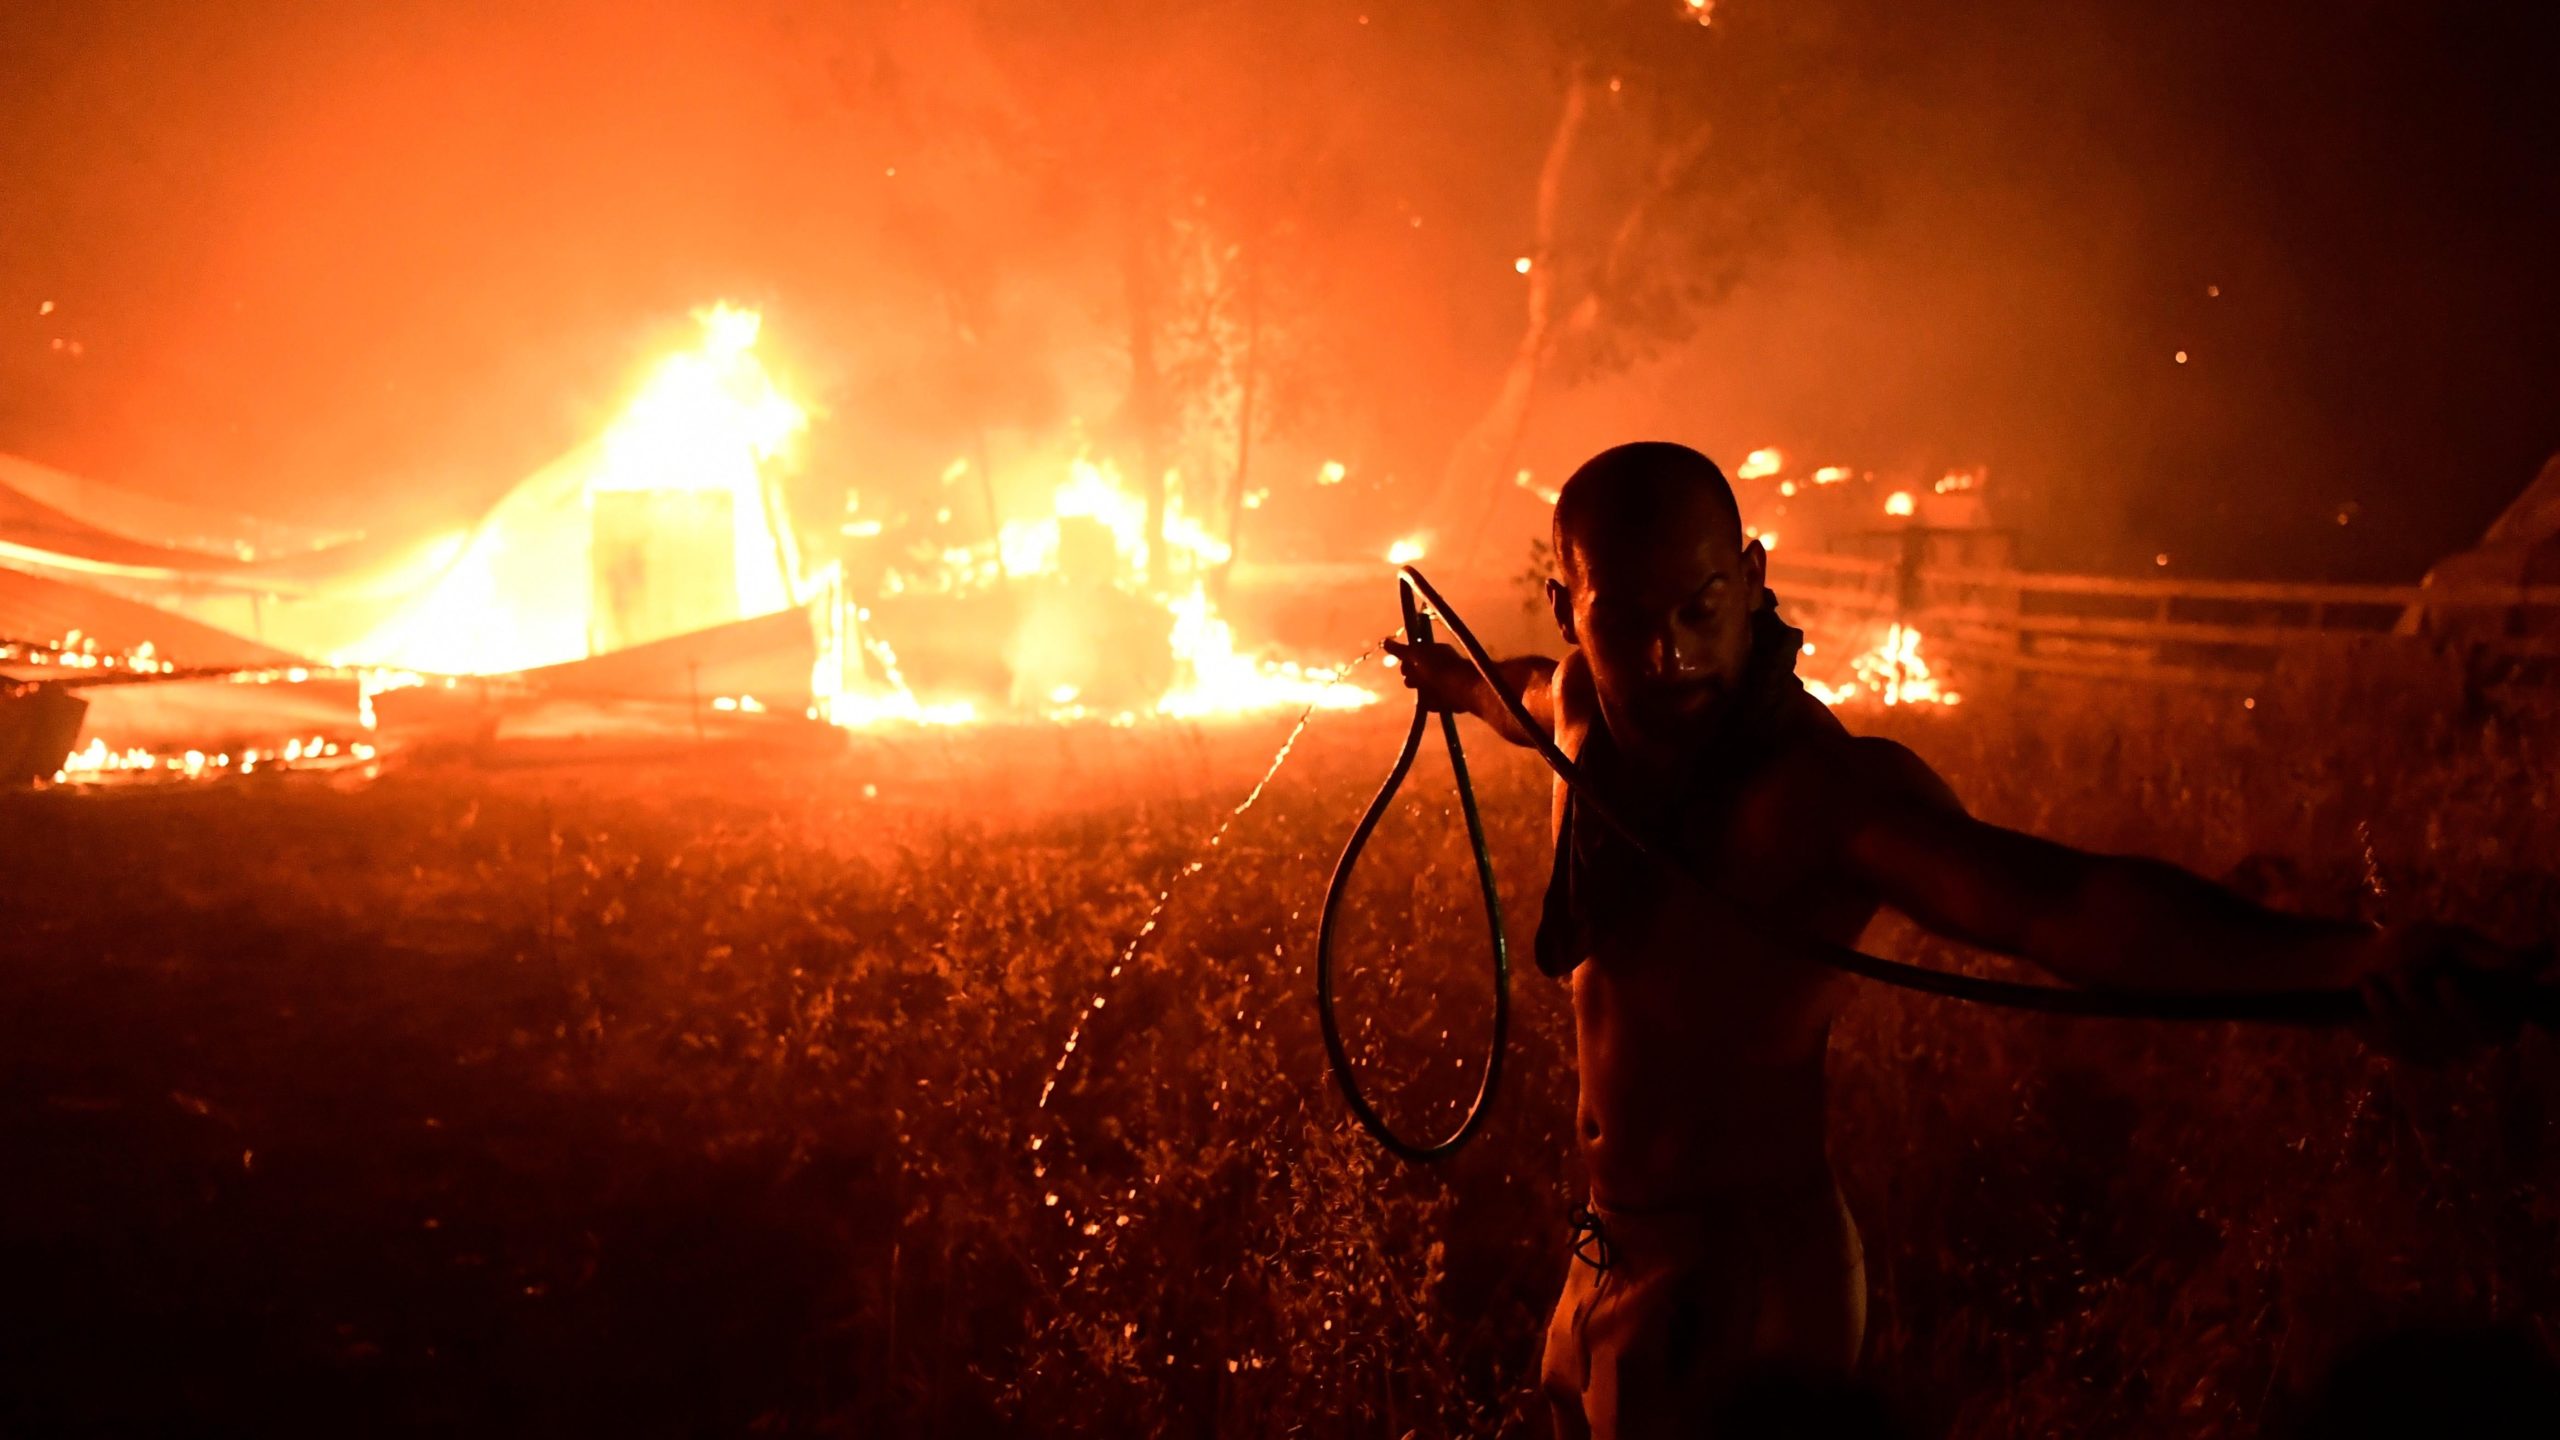 A man uses a water hose during a wildfire in Adames area. (Photo: Michael Varaklas, AP)